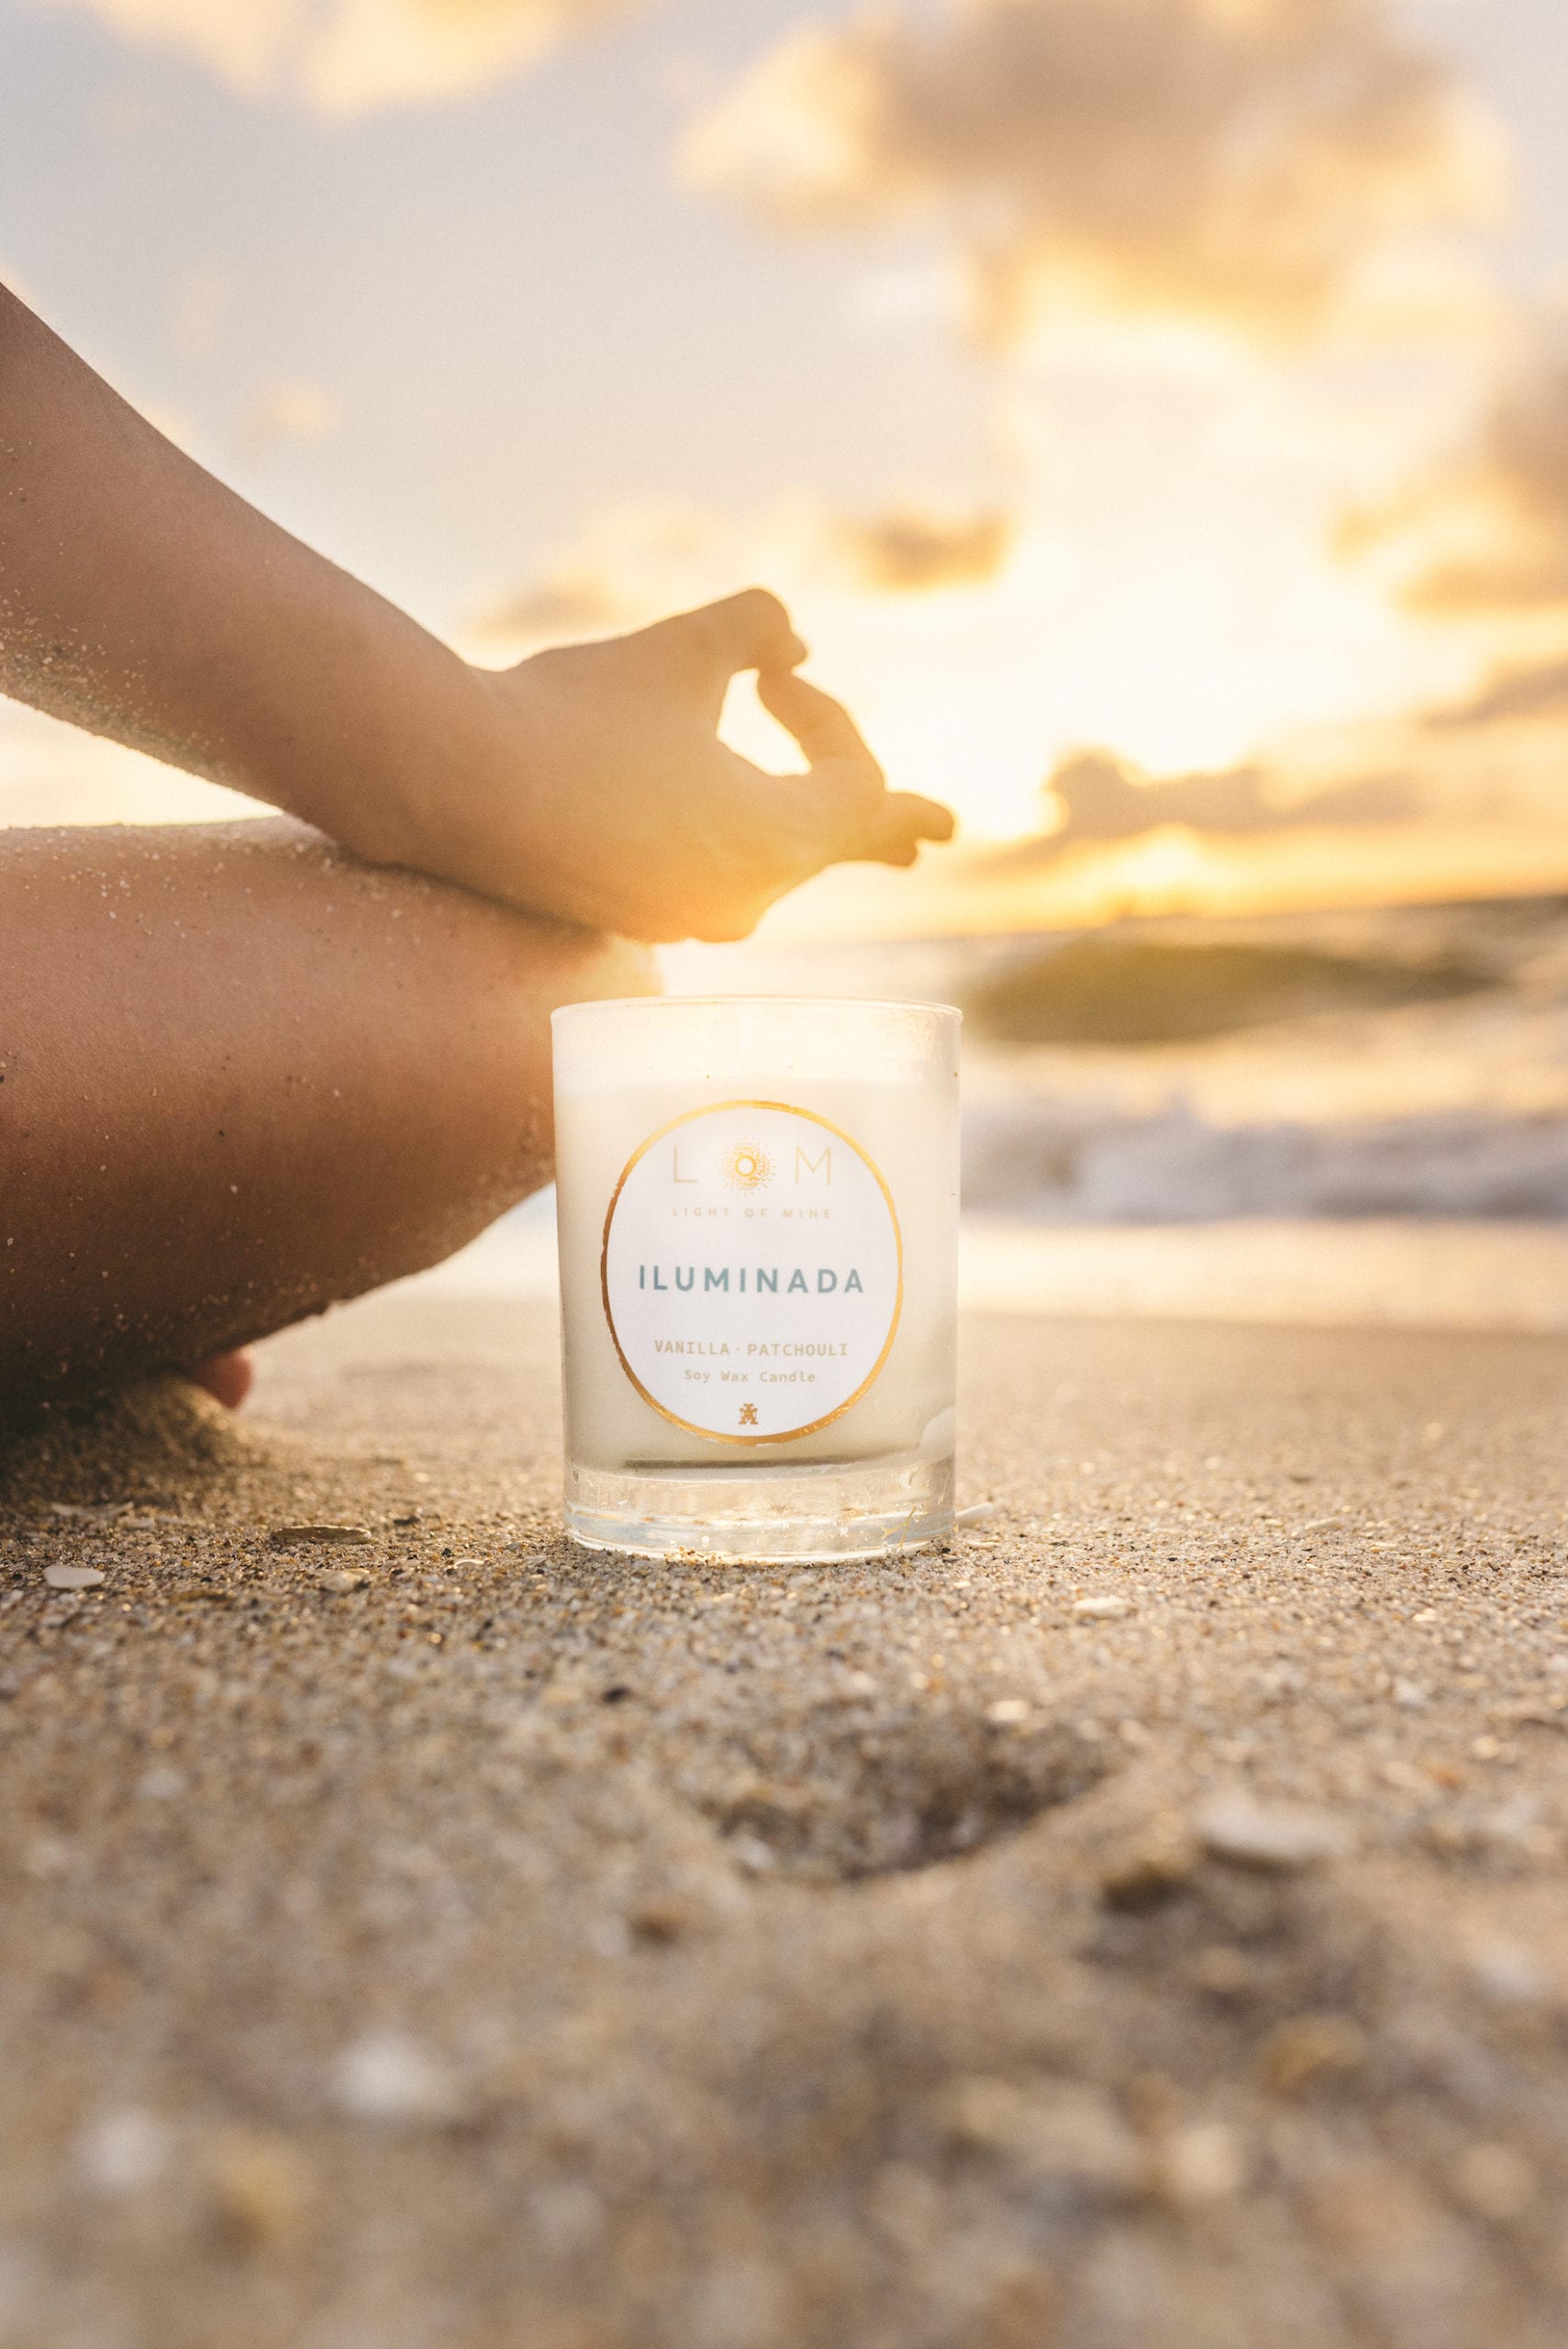 Sand covered person doing Yoga ooommm next to Light of Mine soy wax candle on a beach with bright sunshine.